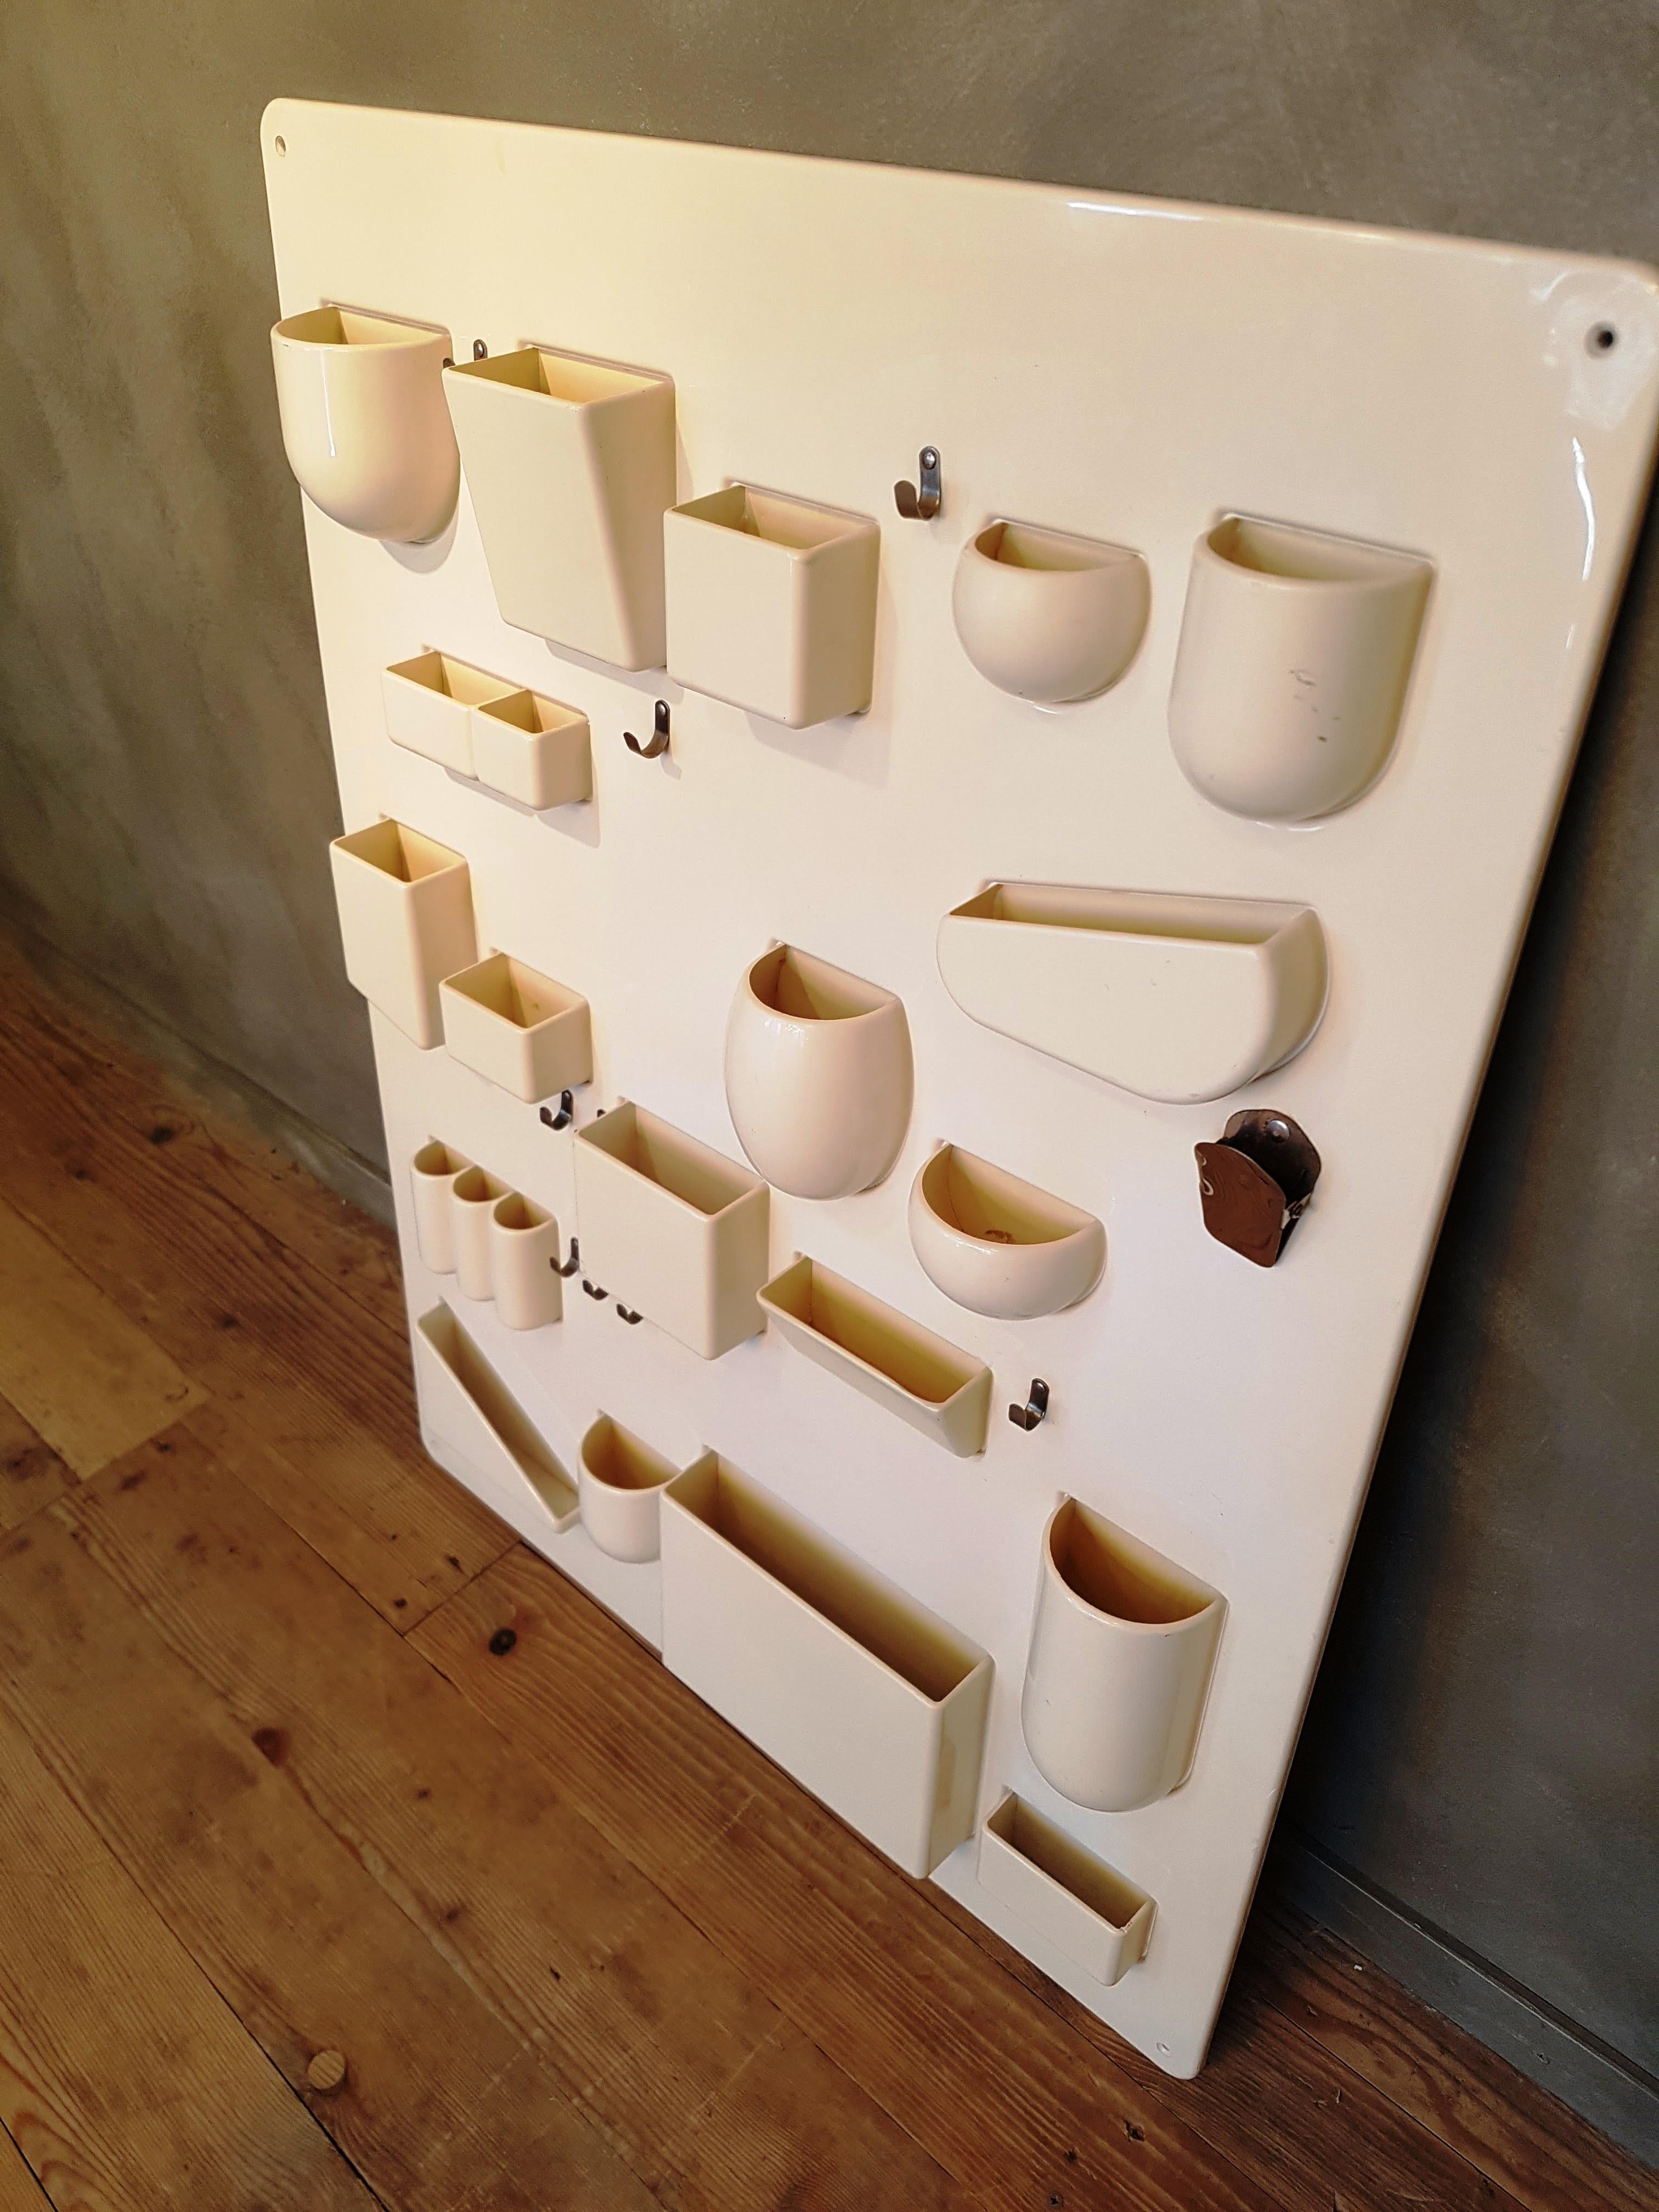 This pop art wall organizer is made from crème white ABS plastic. The object has several plastic compartments, as well as a chrome clip and several chrome hooks. In a very good condition with only a little rust on the metal hooks and clips, but